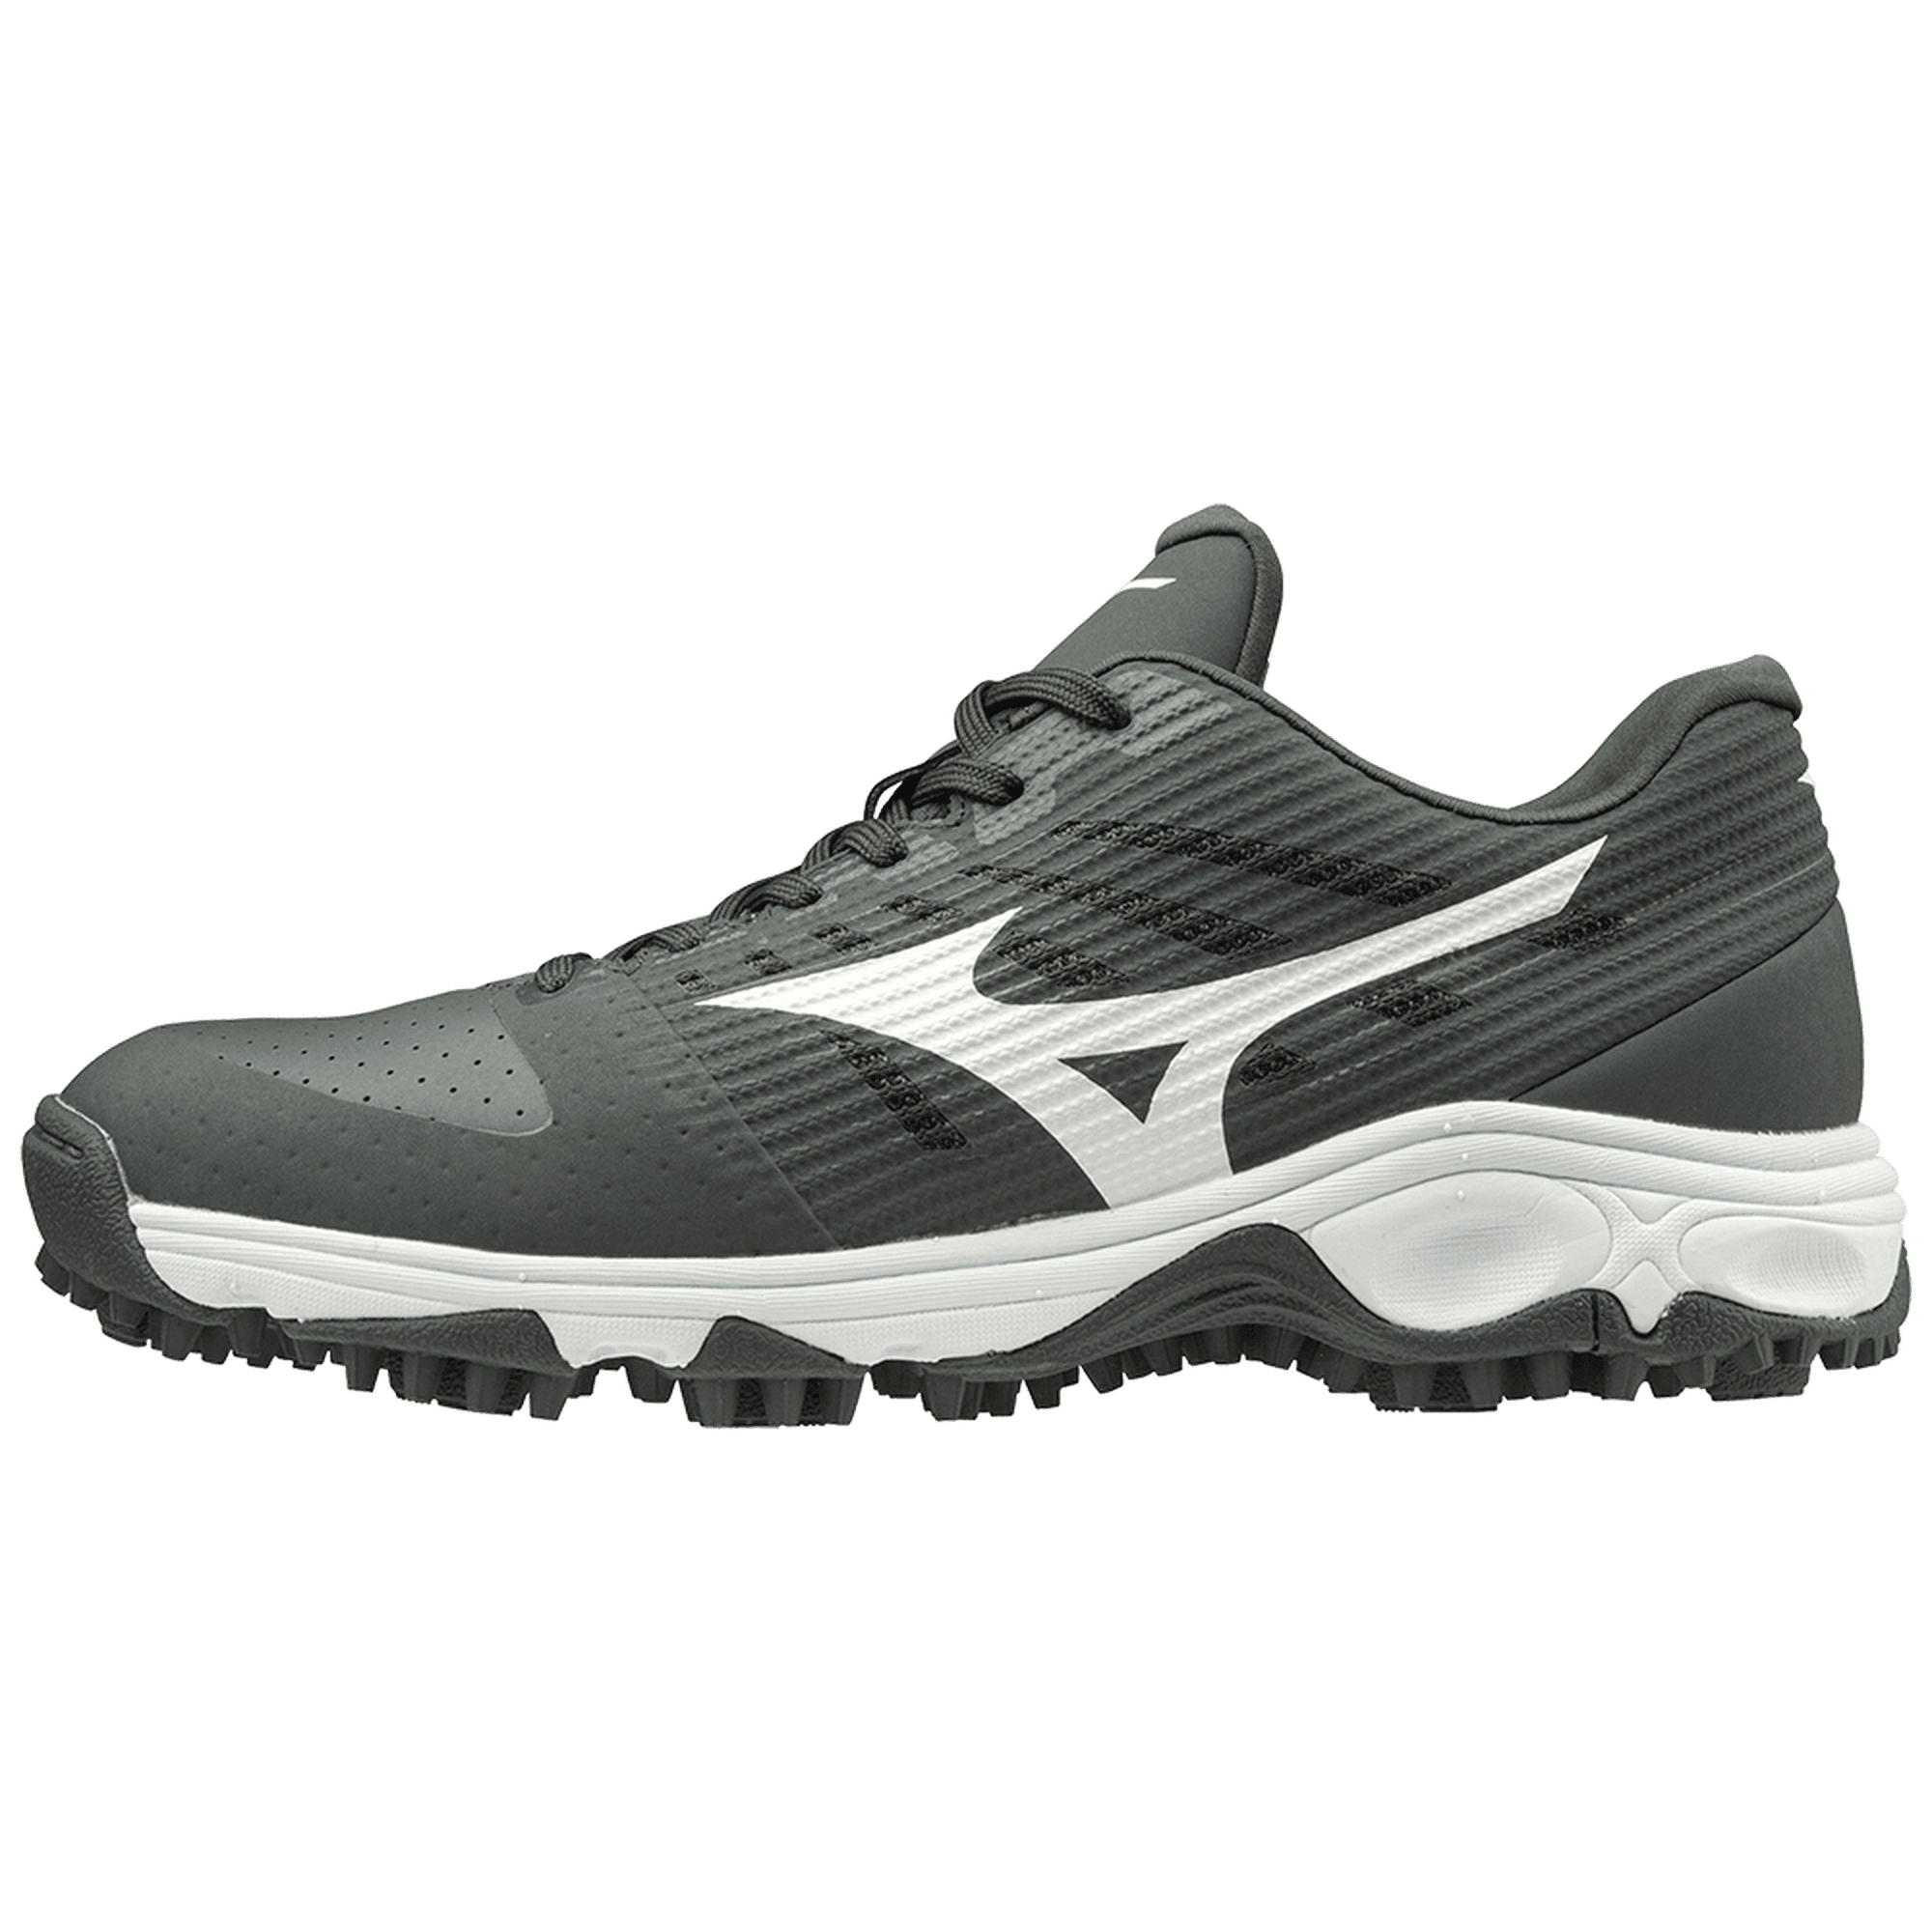 mizuno turf shoes with pitching toe